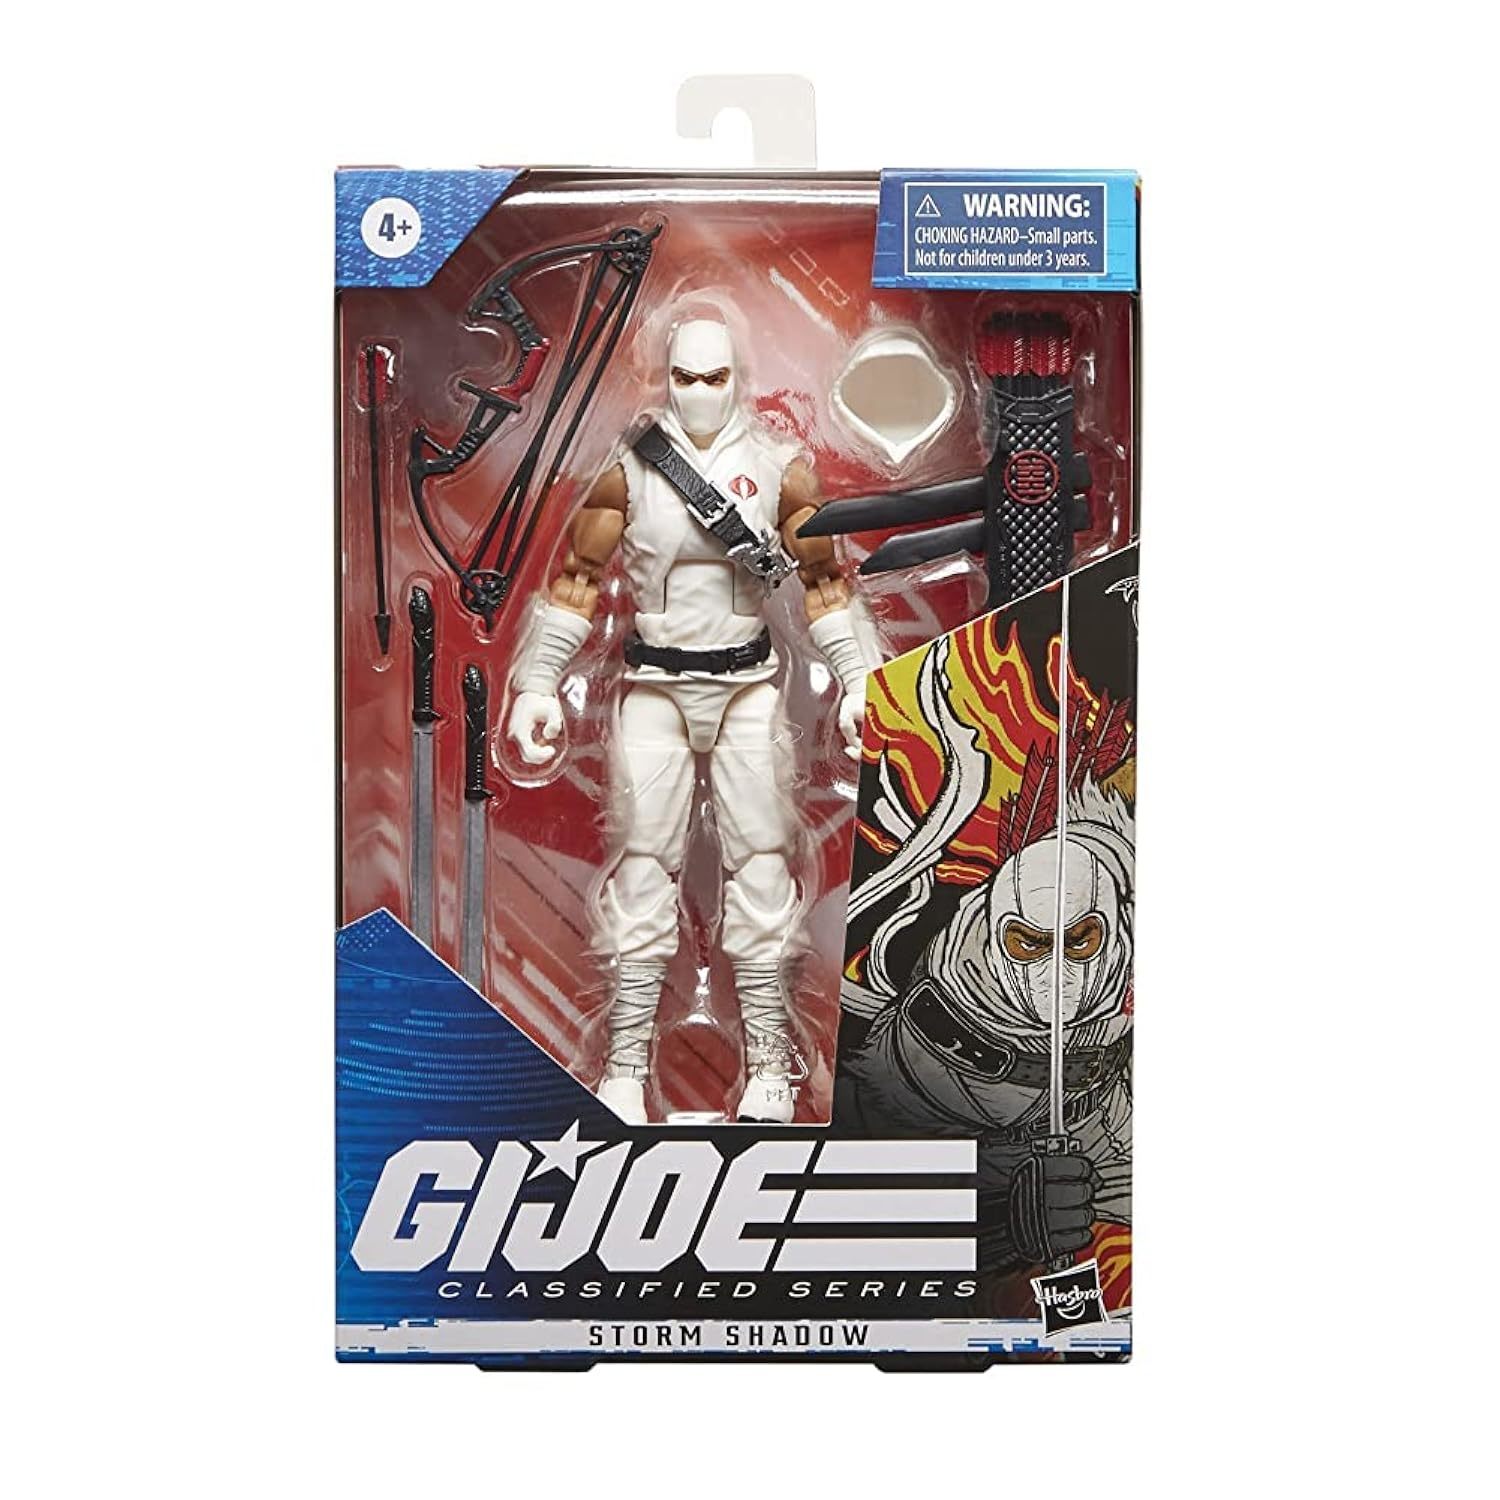 Primary image for G.I. Joe Classified Series Storm Shadow Action Figure 35 Collectible Premium Toy